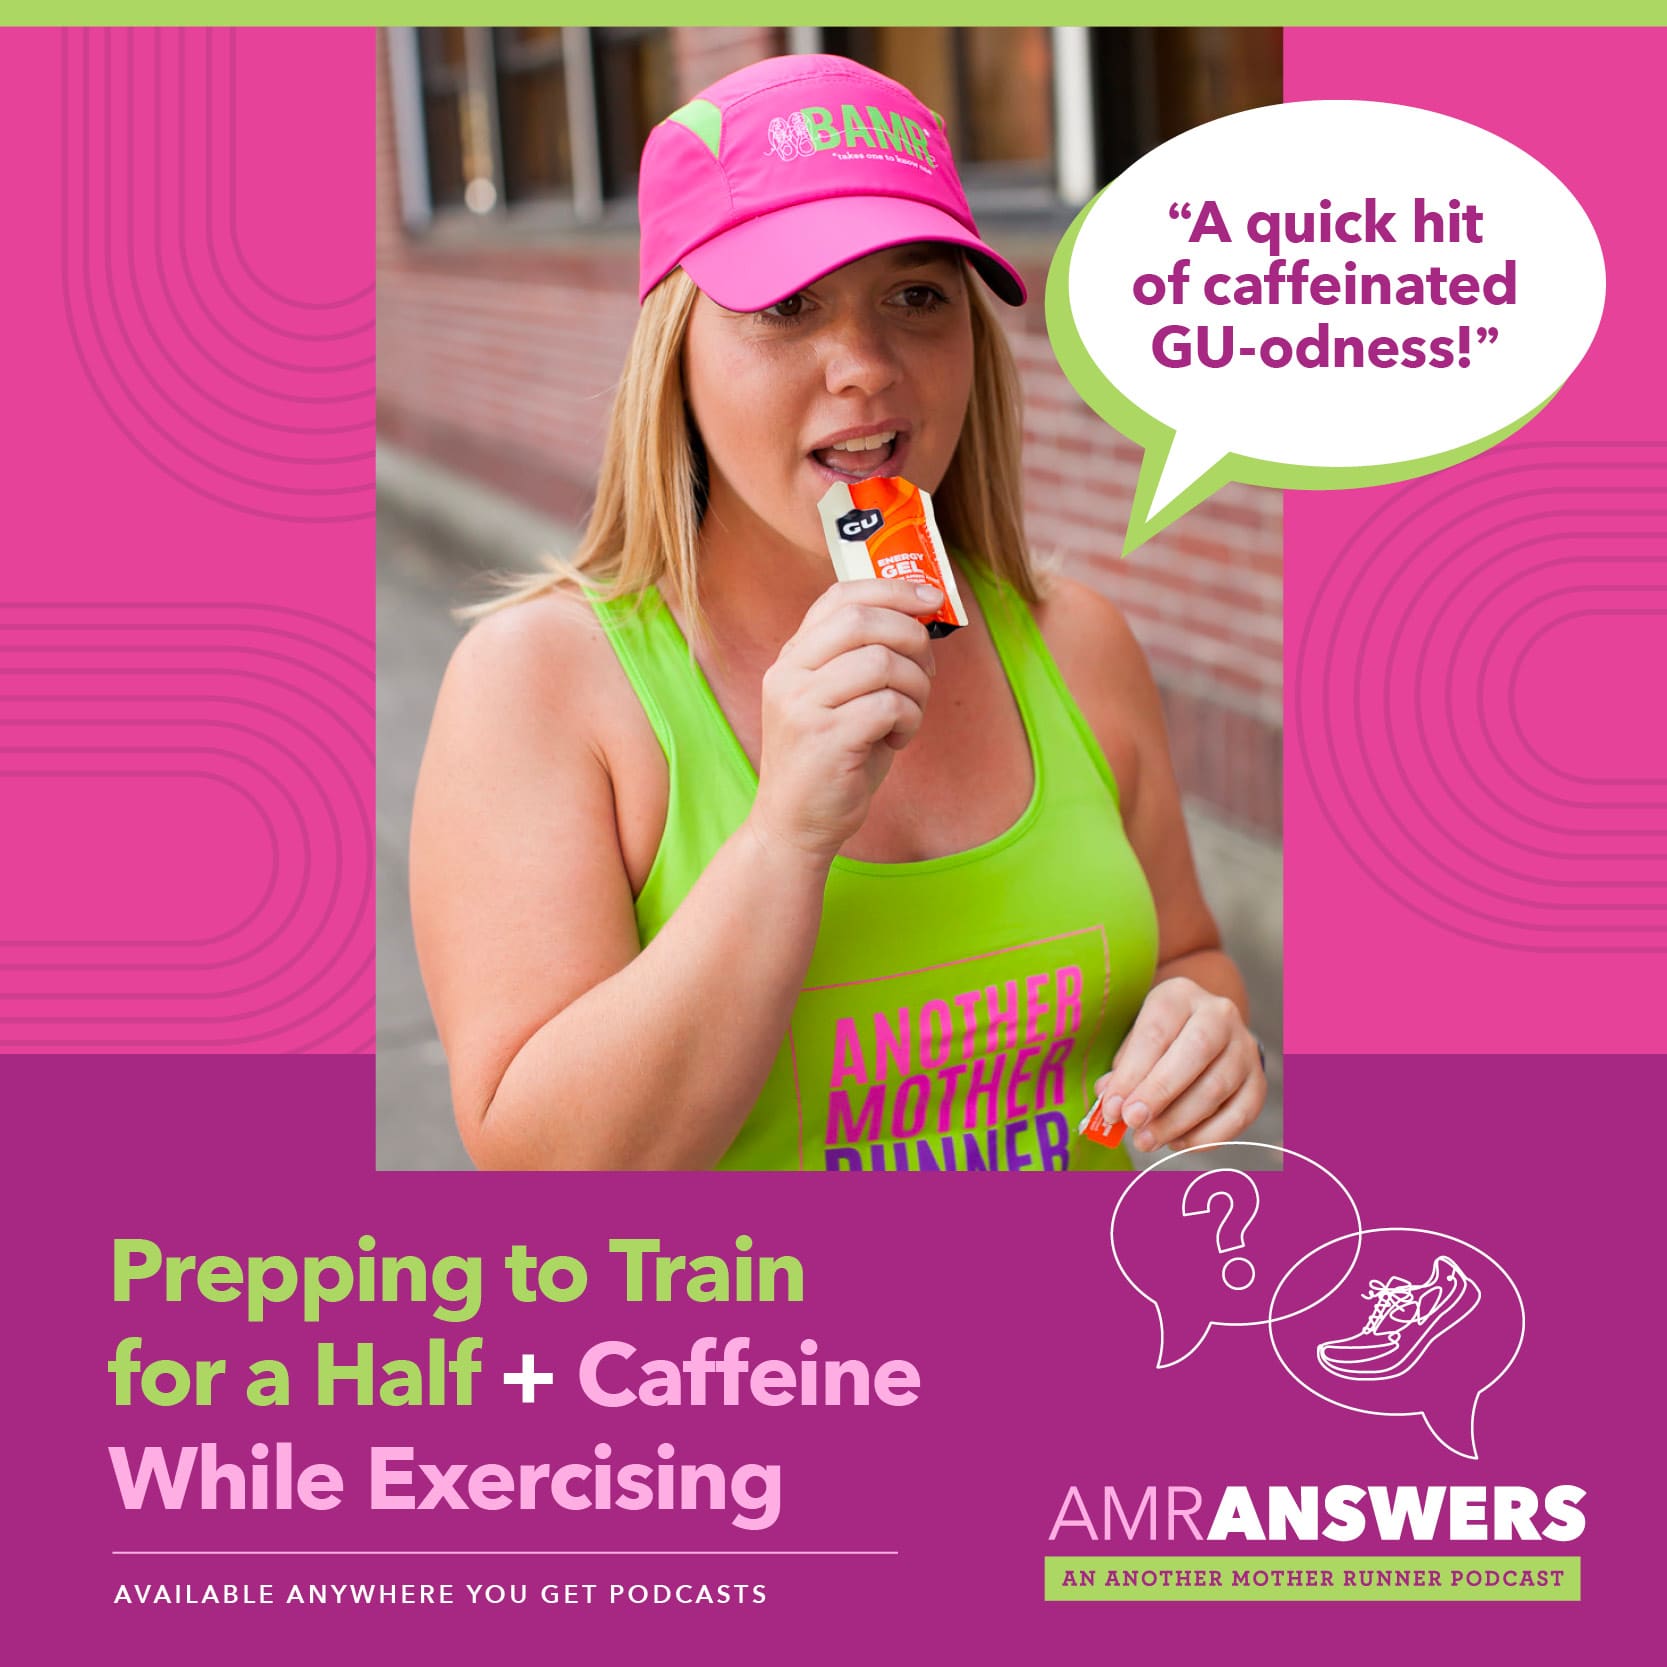 AMR Answers: “Lifting Heavy” Definition + Successive Half-Marathons •  Another Mother Runner